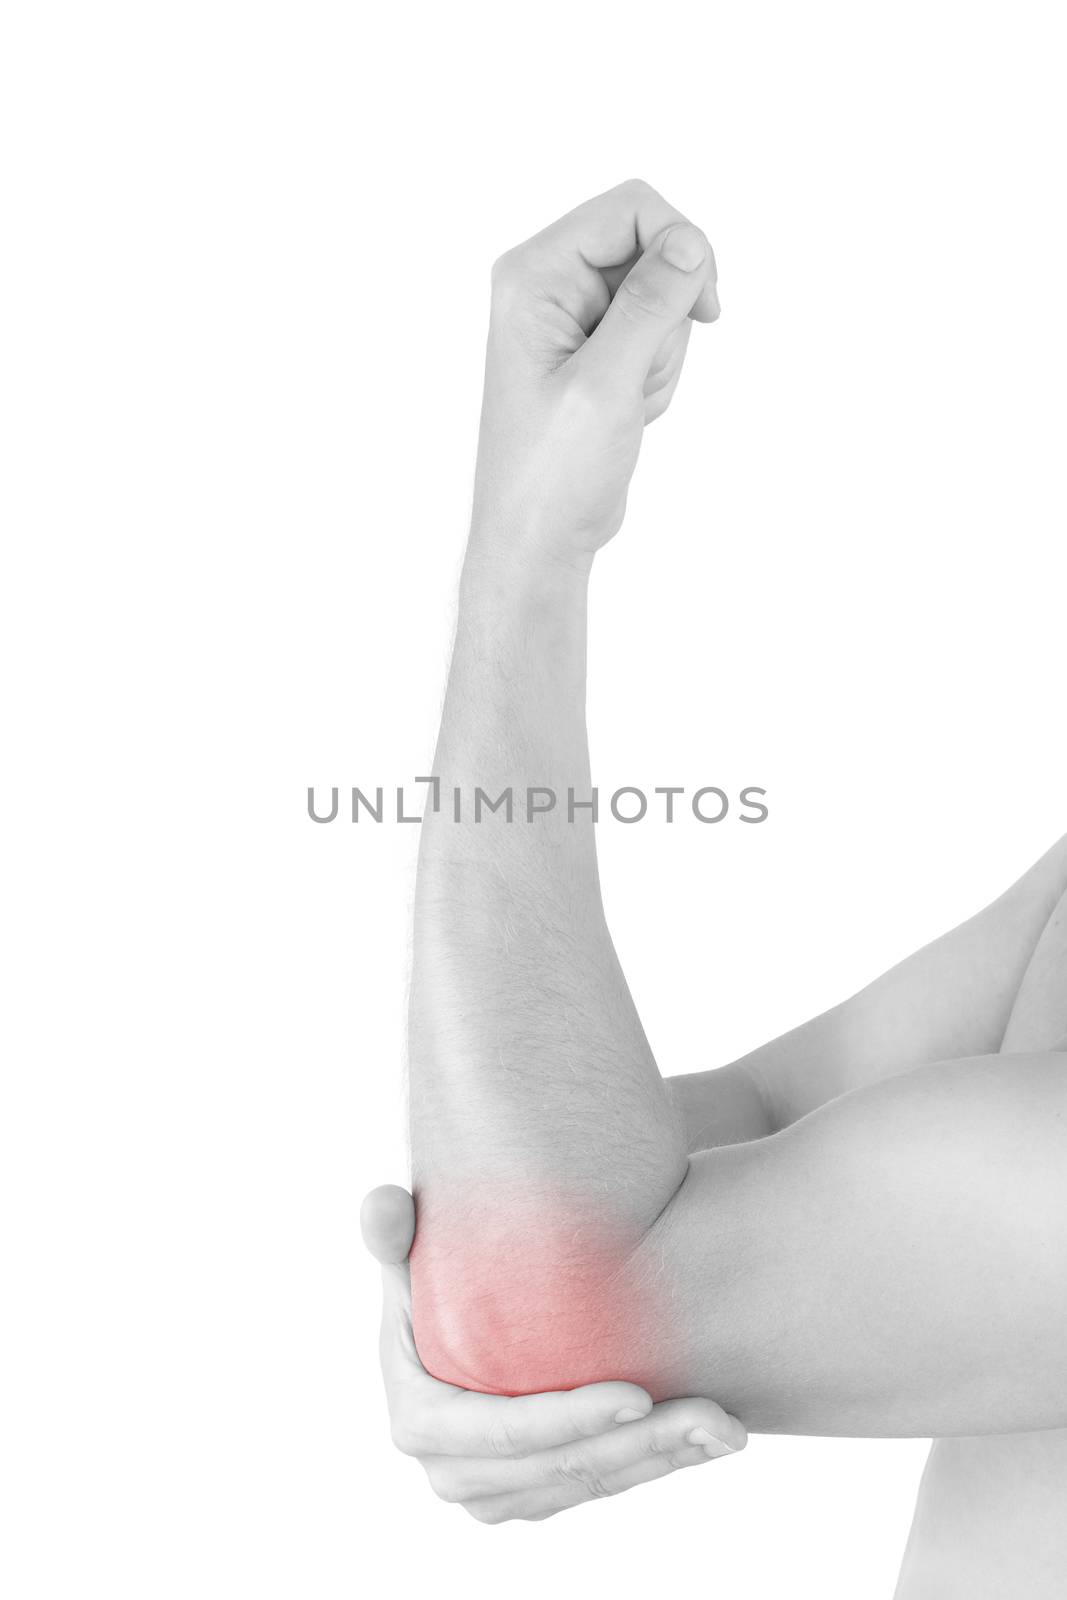 Close up on highlighted pain area, elbow pain. Man holding his elbow isolated on white background. Chronic pain concept.